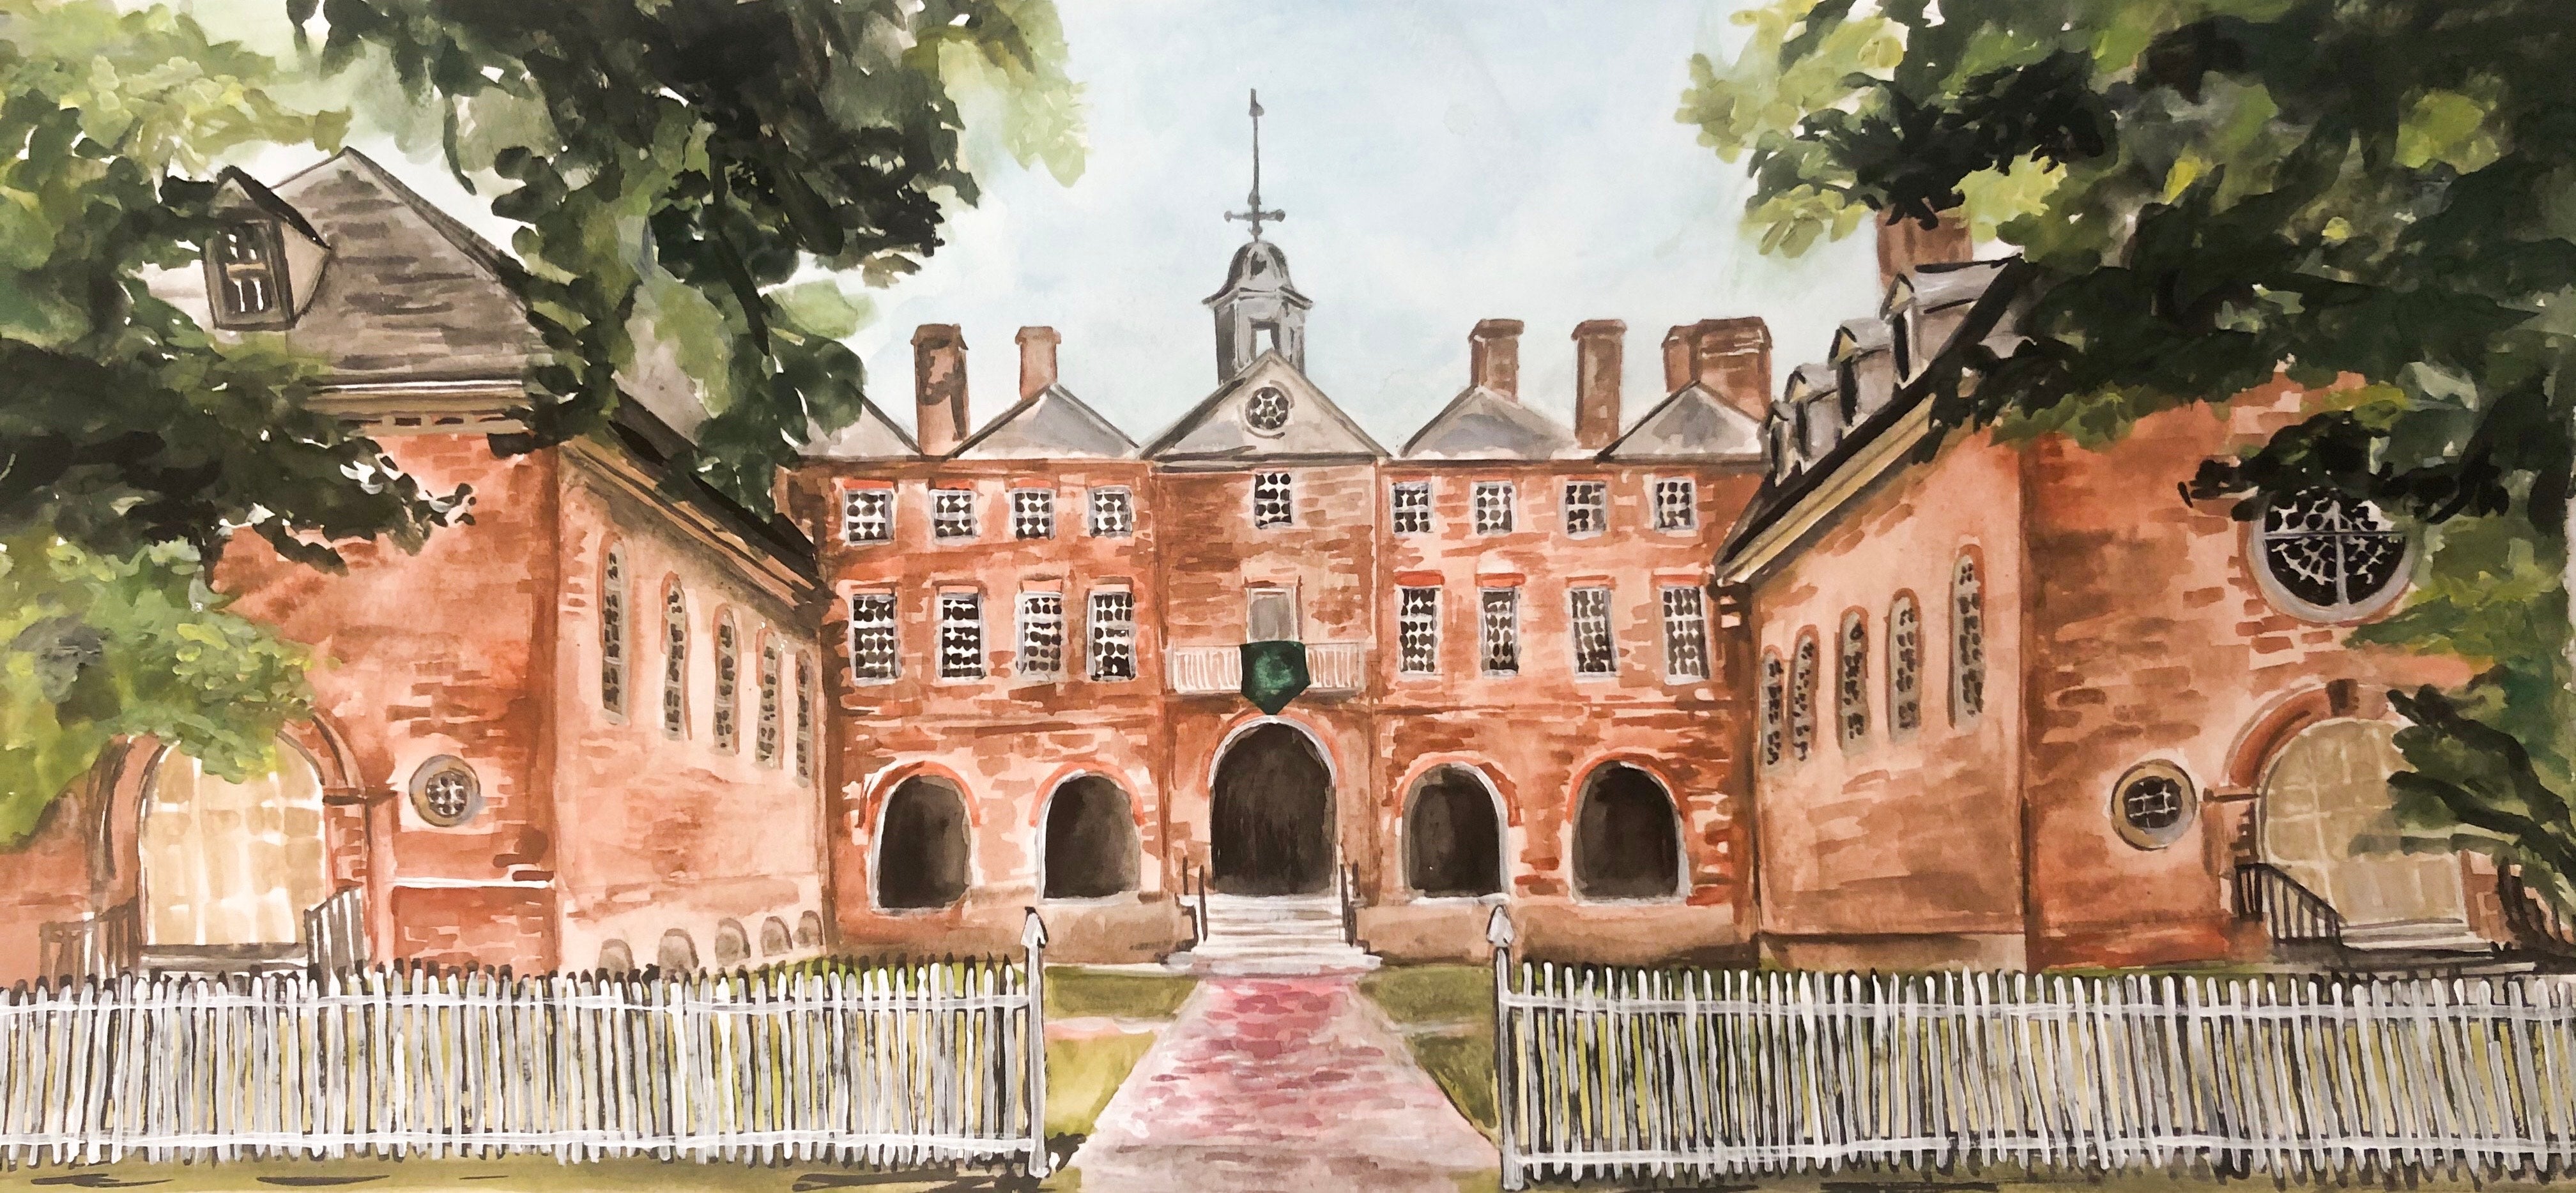 College of William and Mary